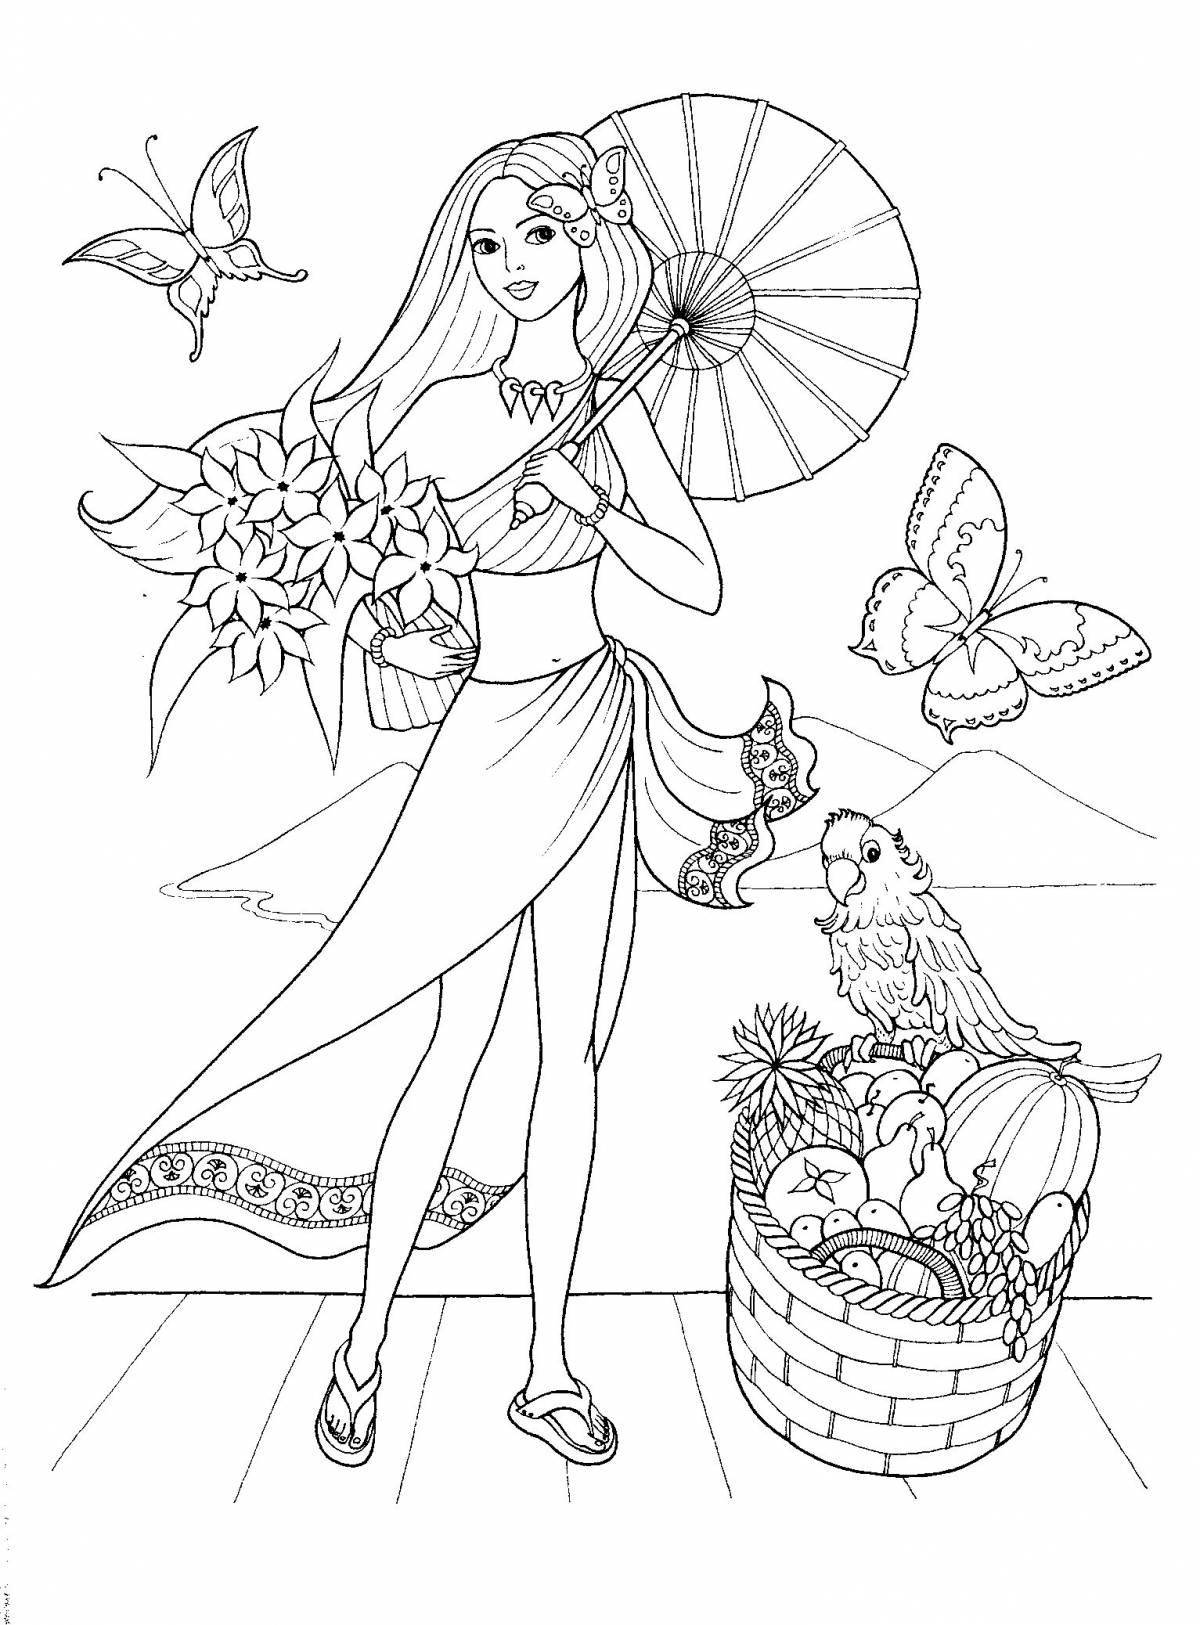 Amazing coloring pages for girls - the best in the world